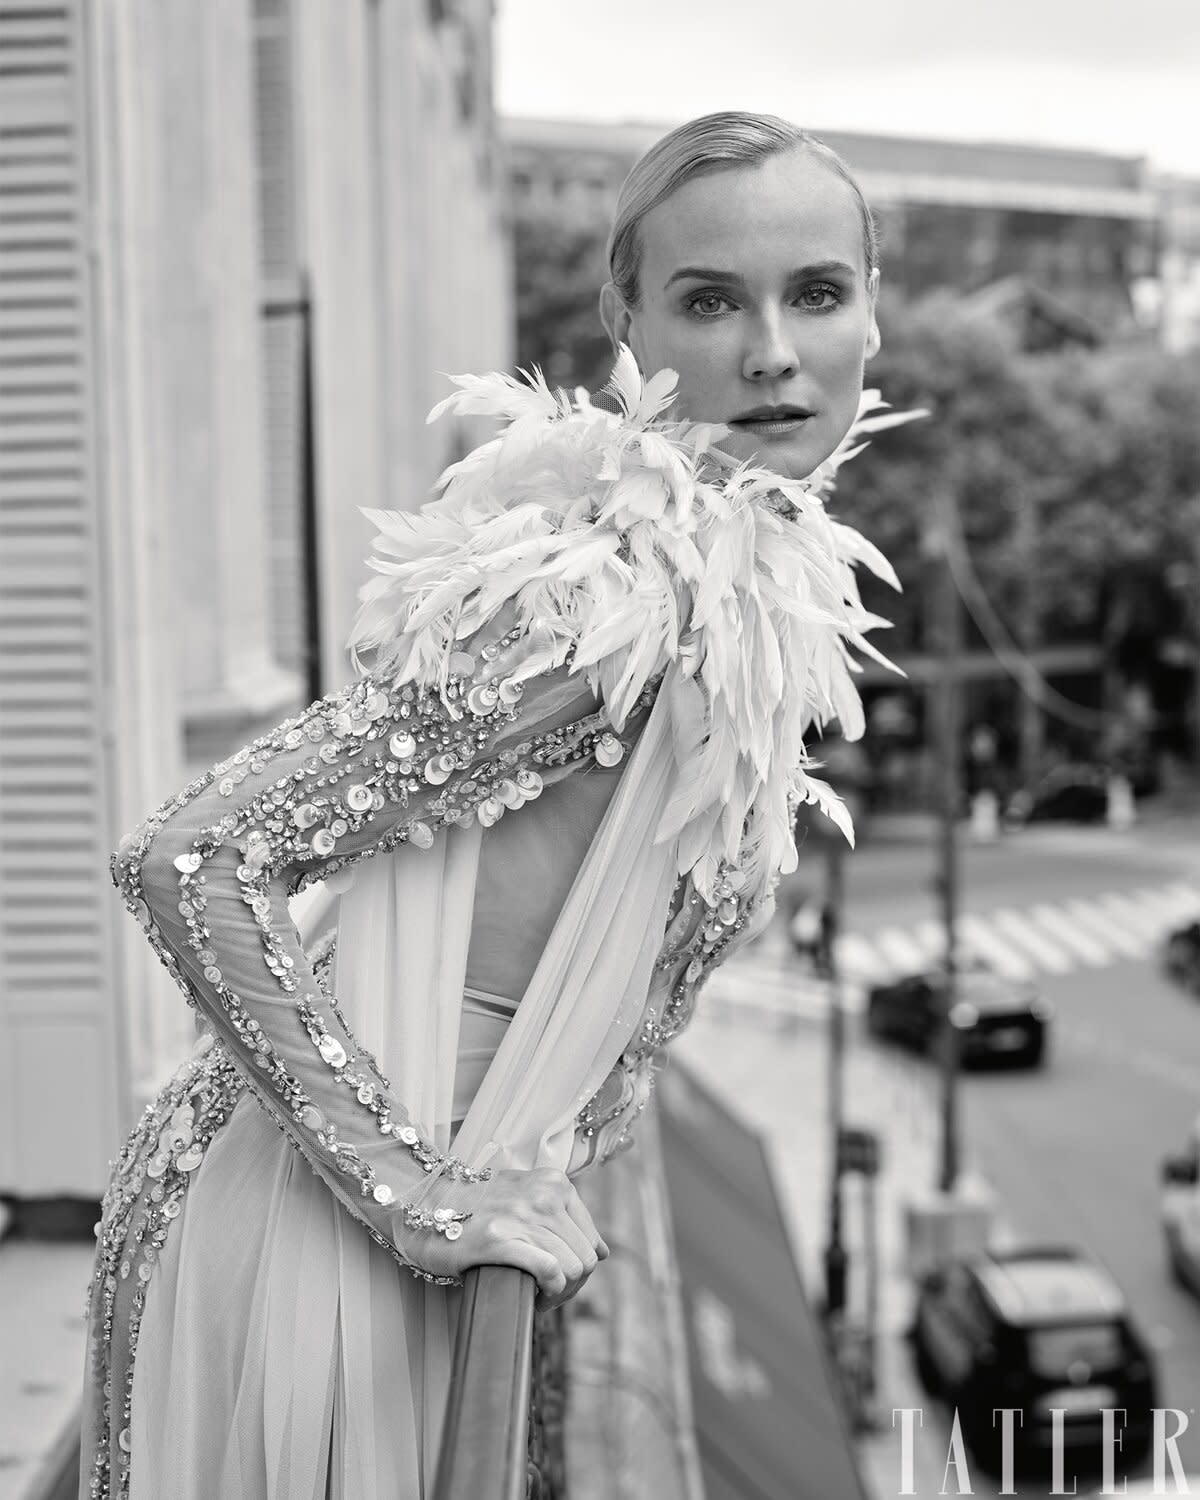 Diane Kruger Talks Changing Her Mind About Having Kids and Feeling She Was 'Meant to Be' a Mom